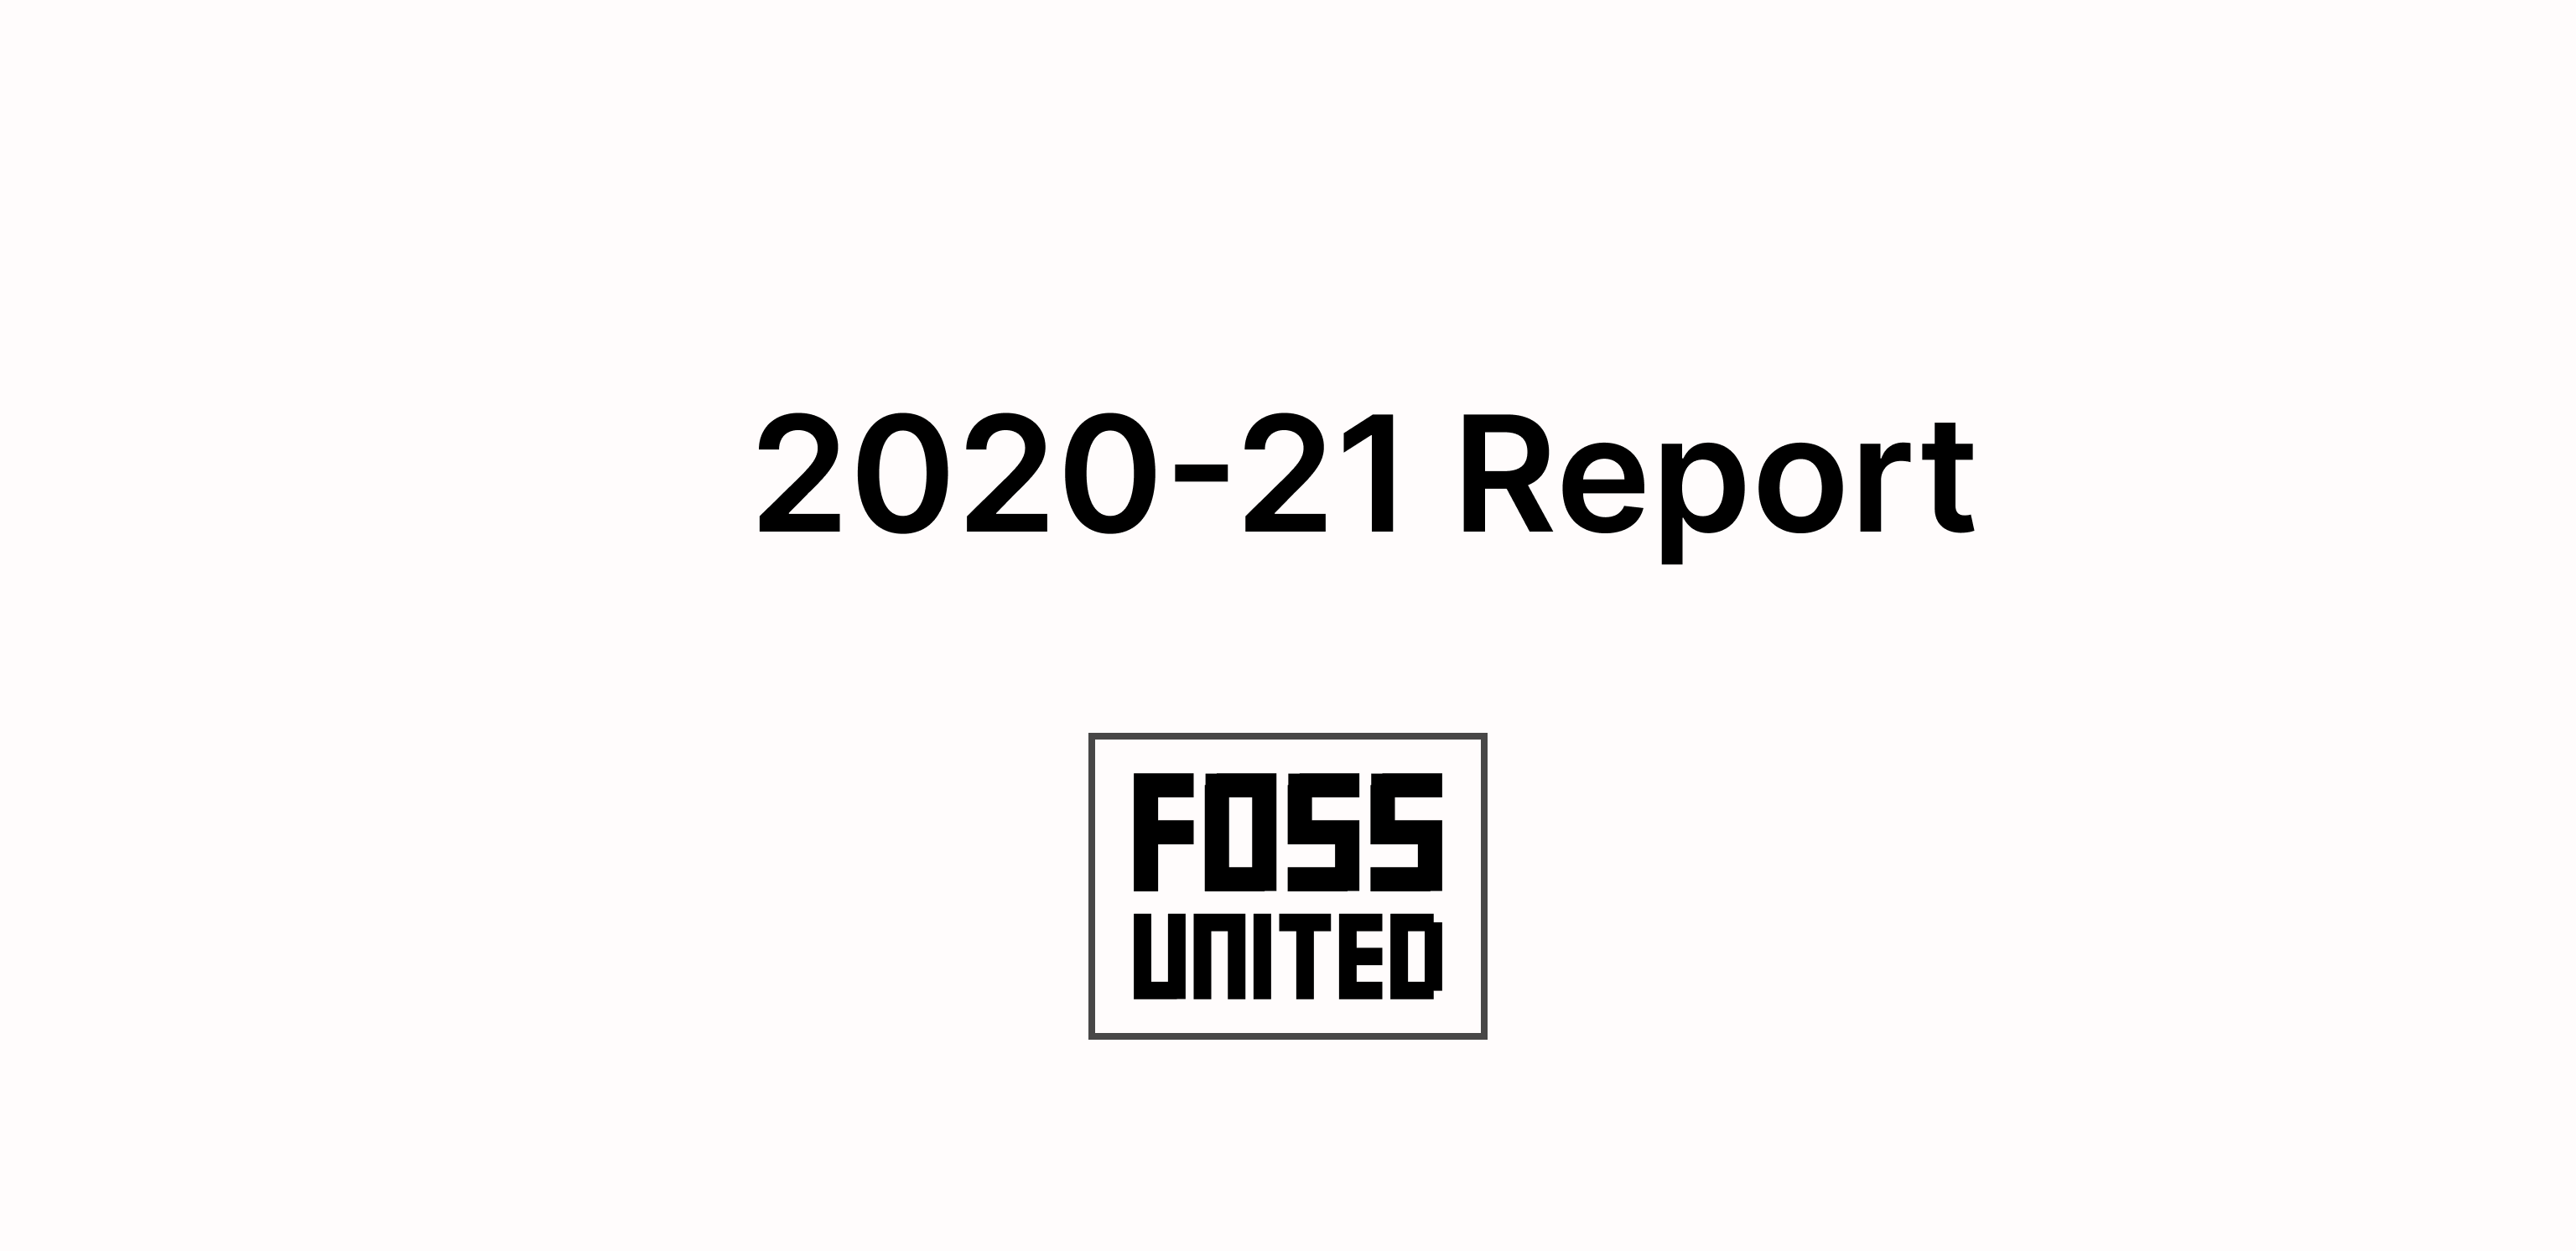 FOSS United 2020-21 report - Cover Image